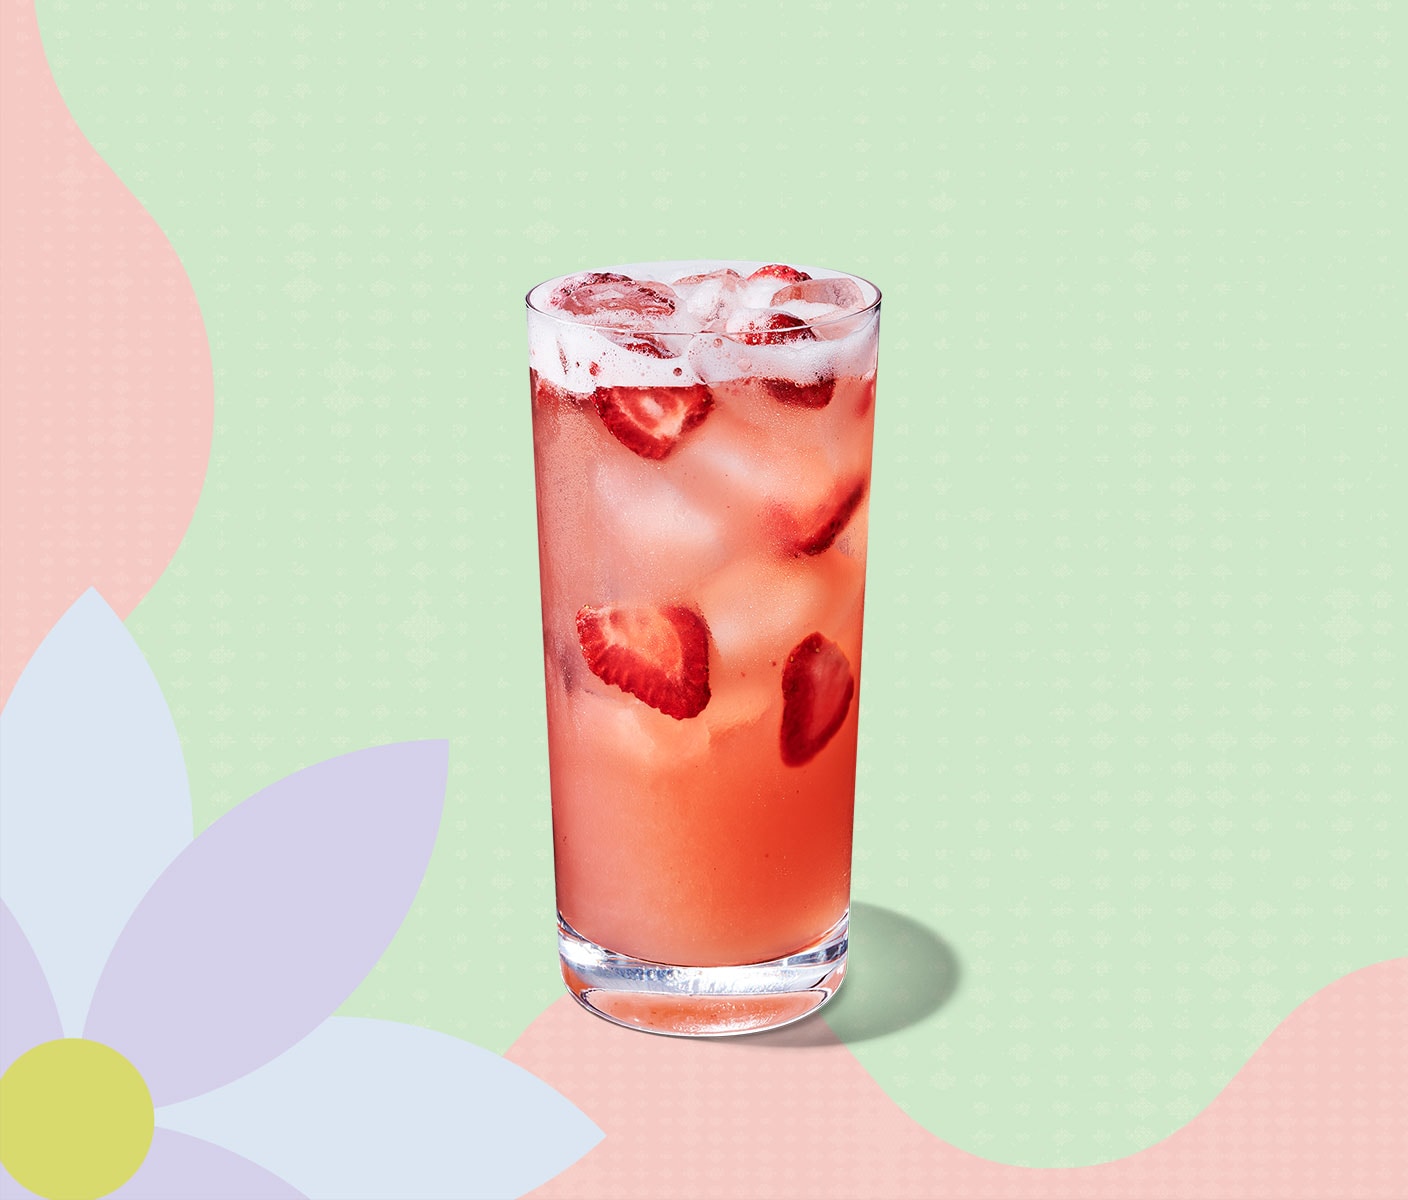 Strawberry-hued iced drink with strawberry inclusions.